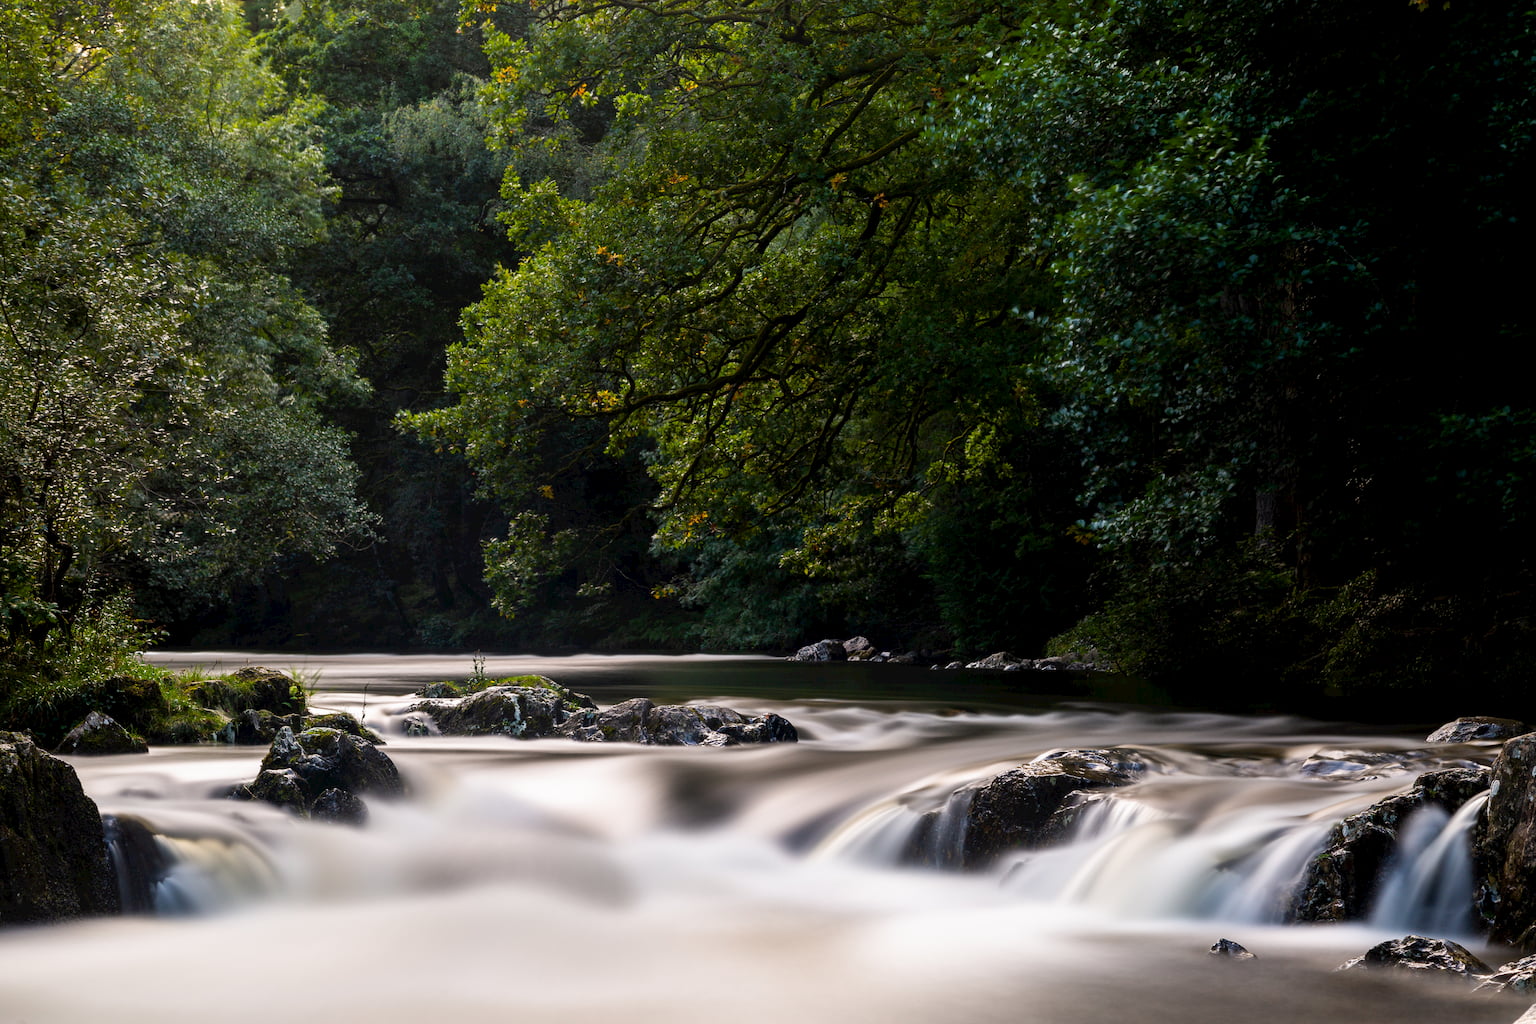 A long exposure photograph of the River Conwy in Betws-y-Coed in North Wales.